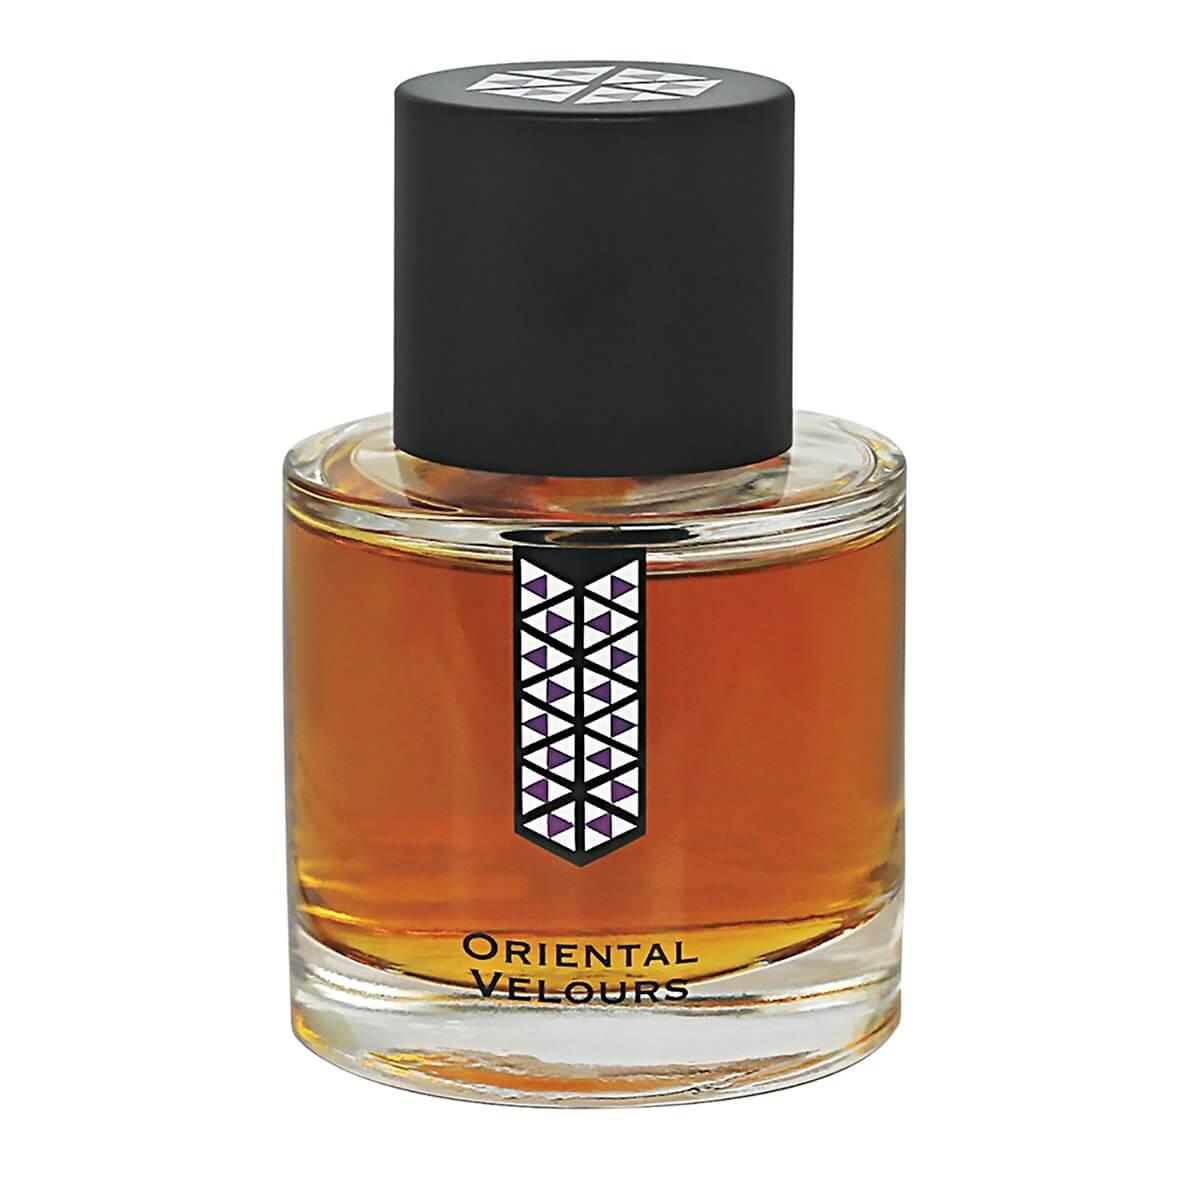 Oriental Velours by Les Indemodables at Indigo Perfumery